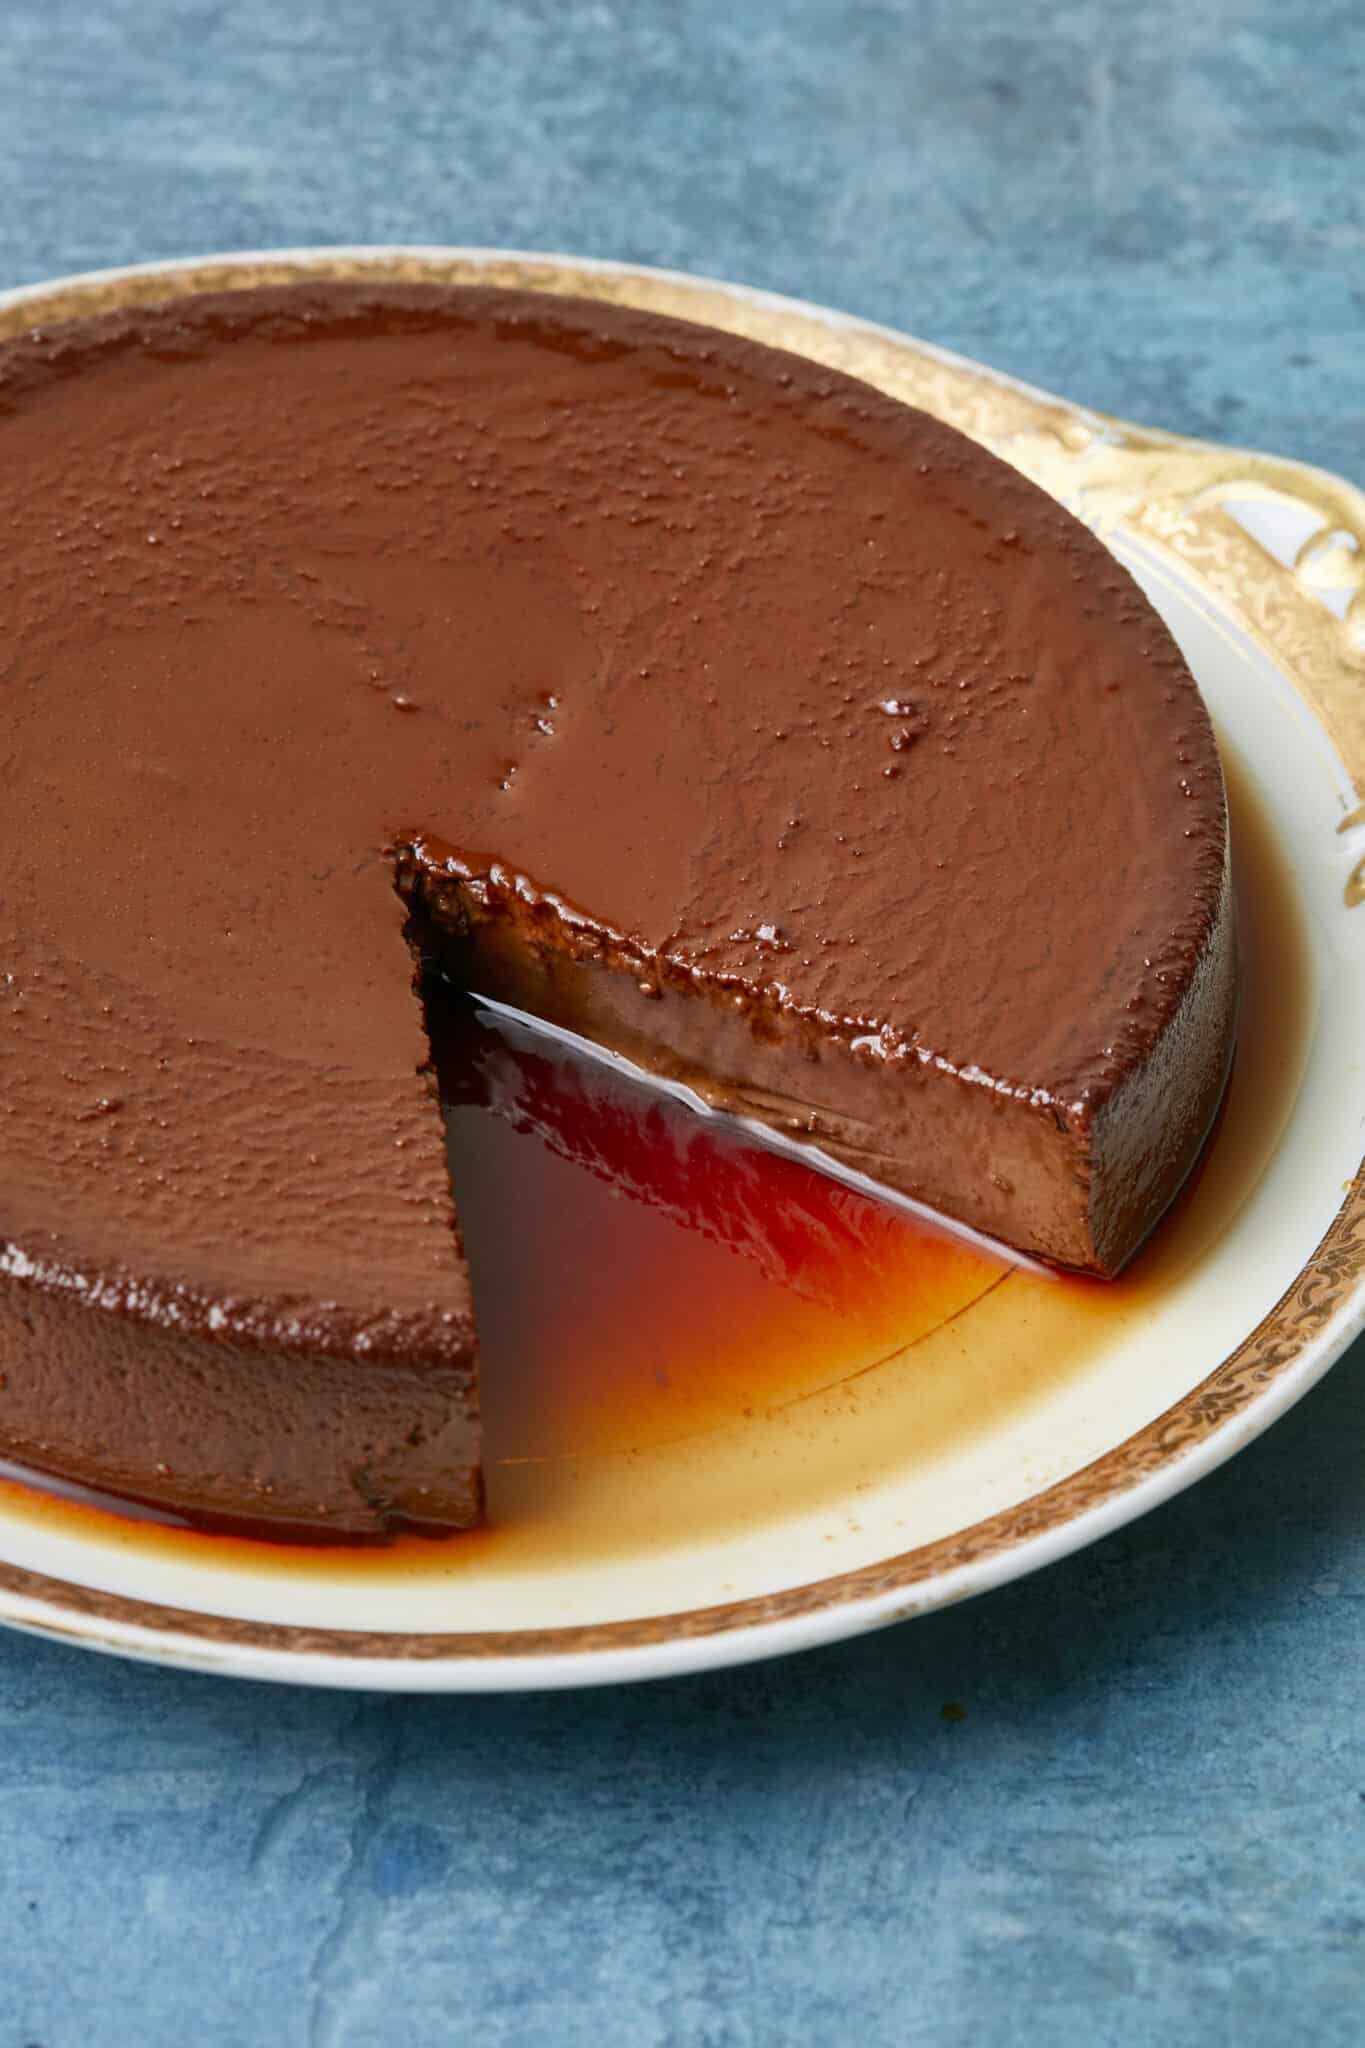 A slice has been cur from the Mexican Chocolate Flan that's served on a golden rim platter. The close-up shot shows that it is silky smooth in deep chocolate color and covered with a thin layer of caramel. 